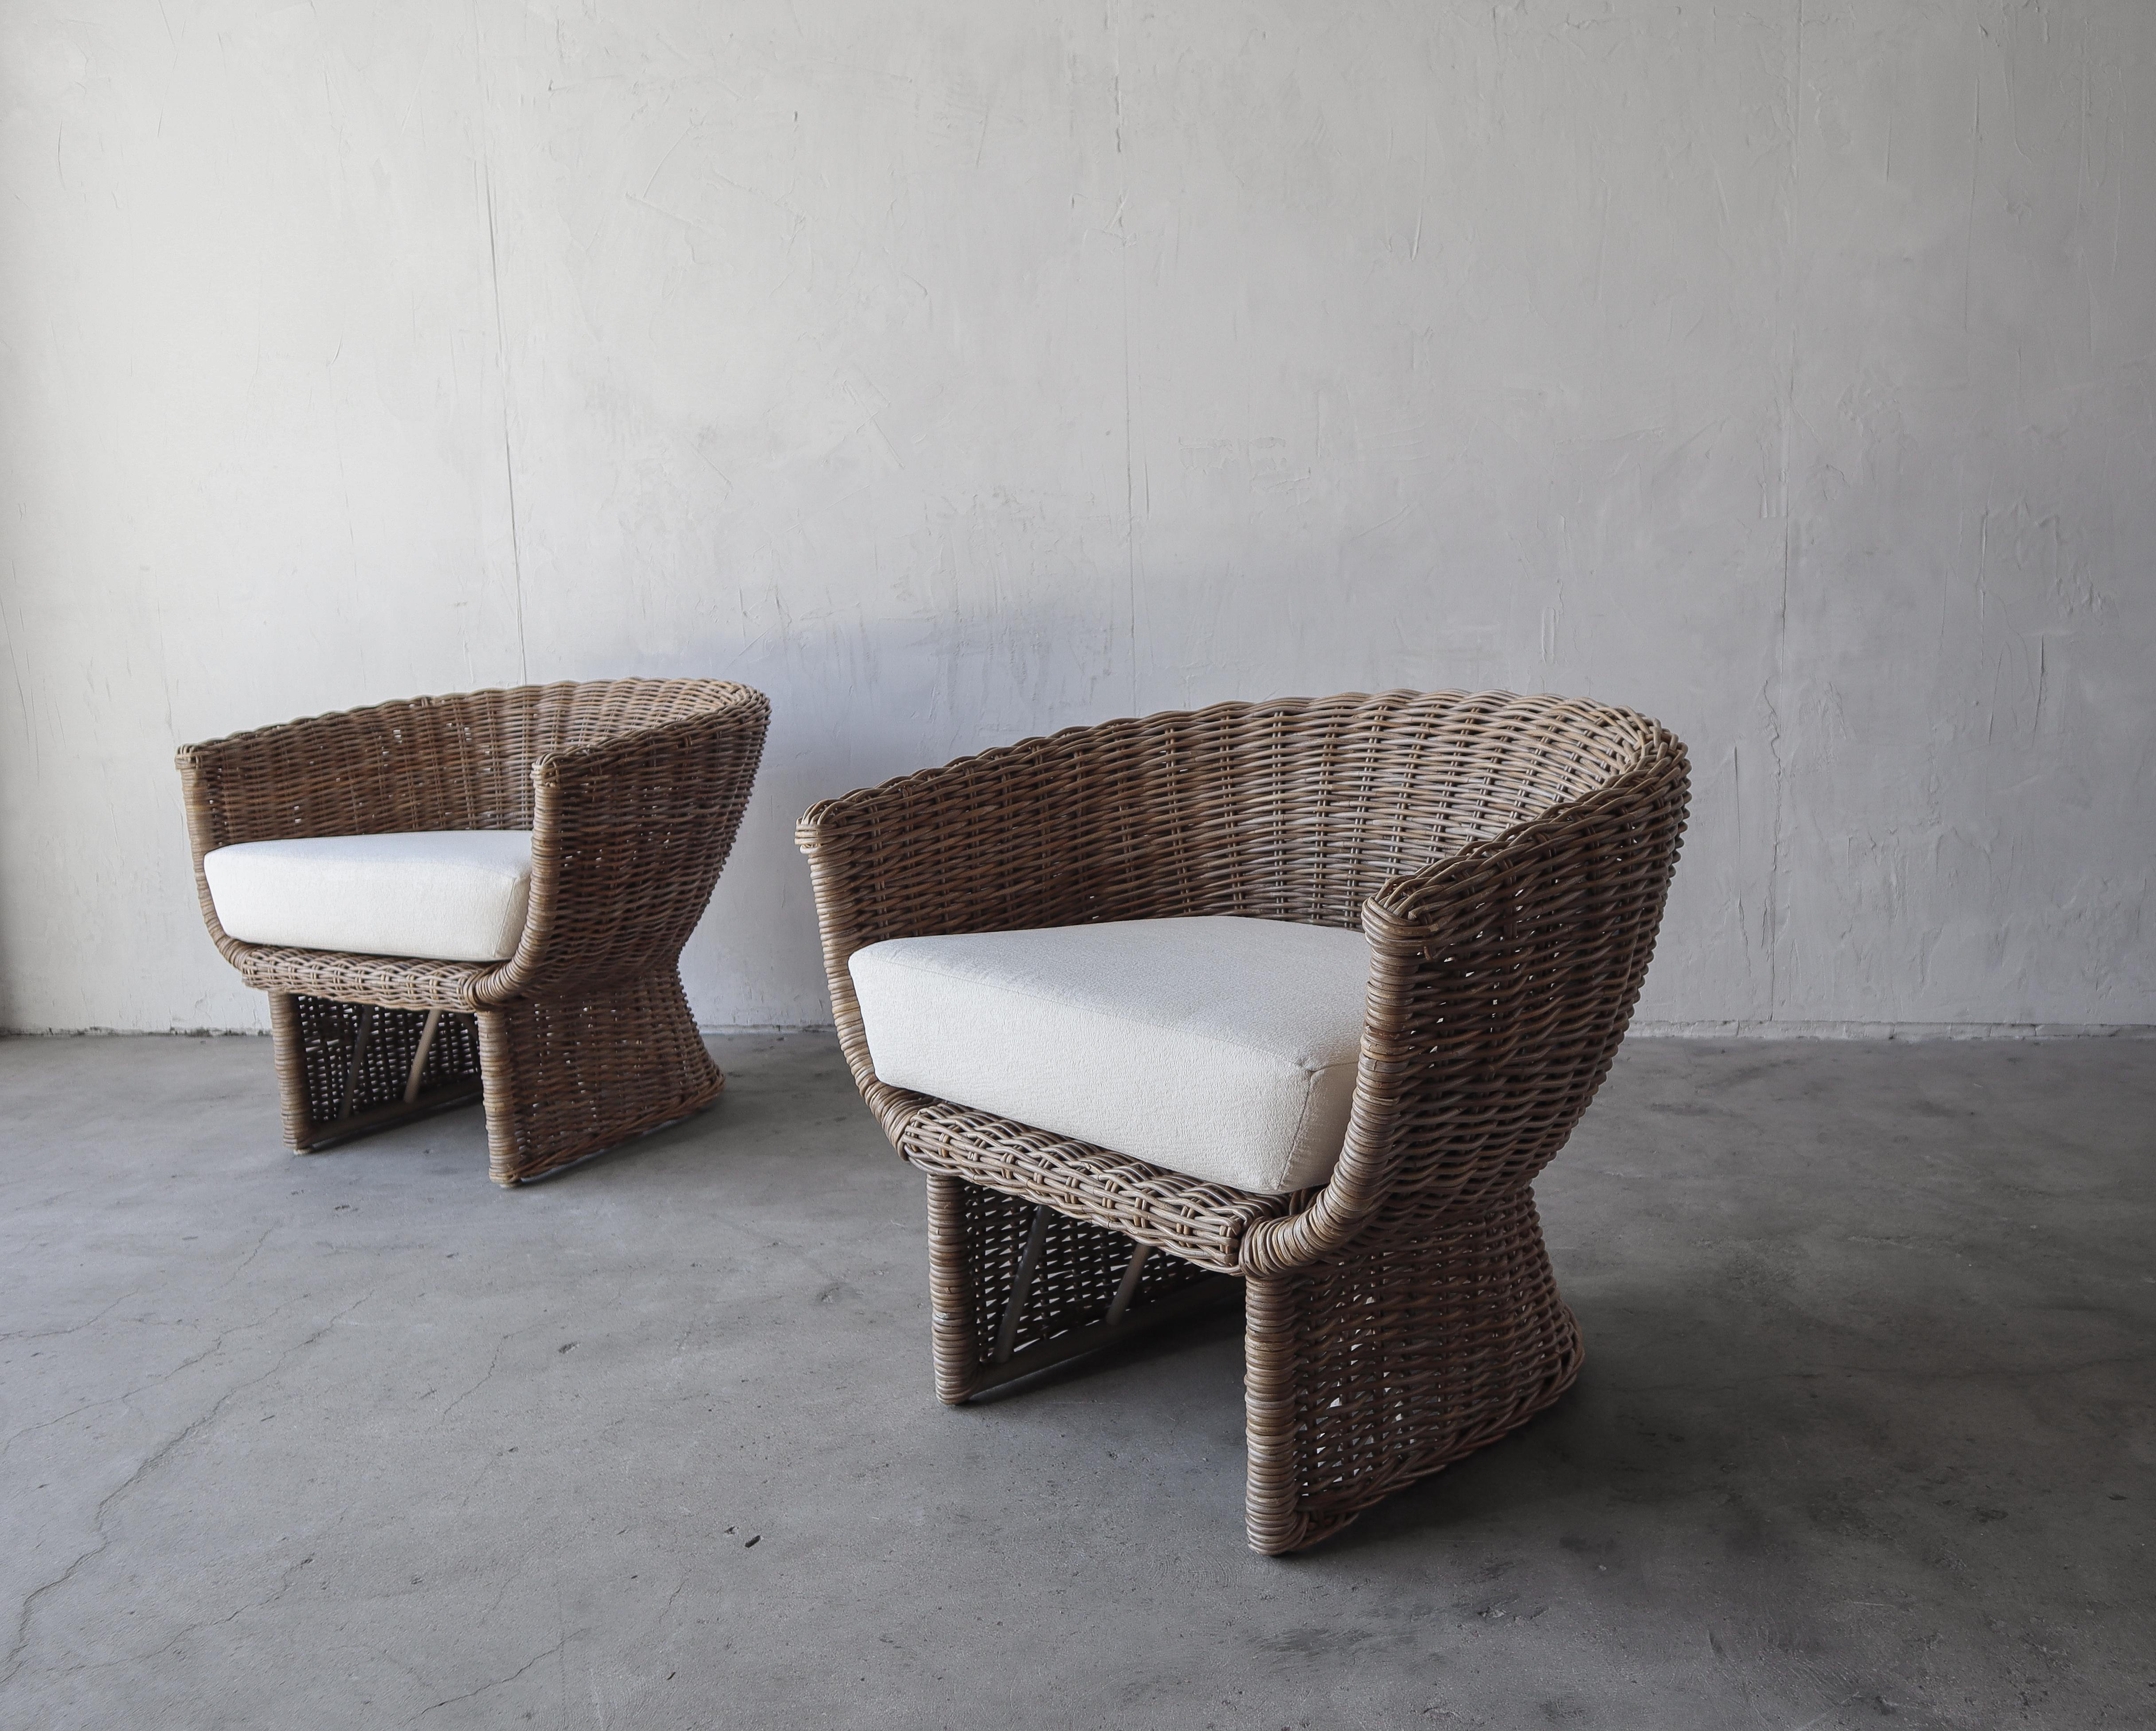 Super stylish pair of wicker tub chairs. Can be used indoor or out.  Wicker is woven over a metal frame making them extremely durable.

Chairs are in excellent condition with all new foam and fabric. Fabric is not outdoor fabric.